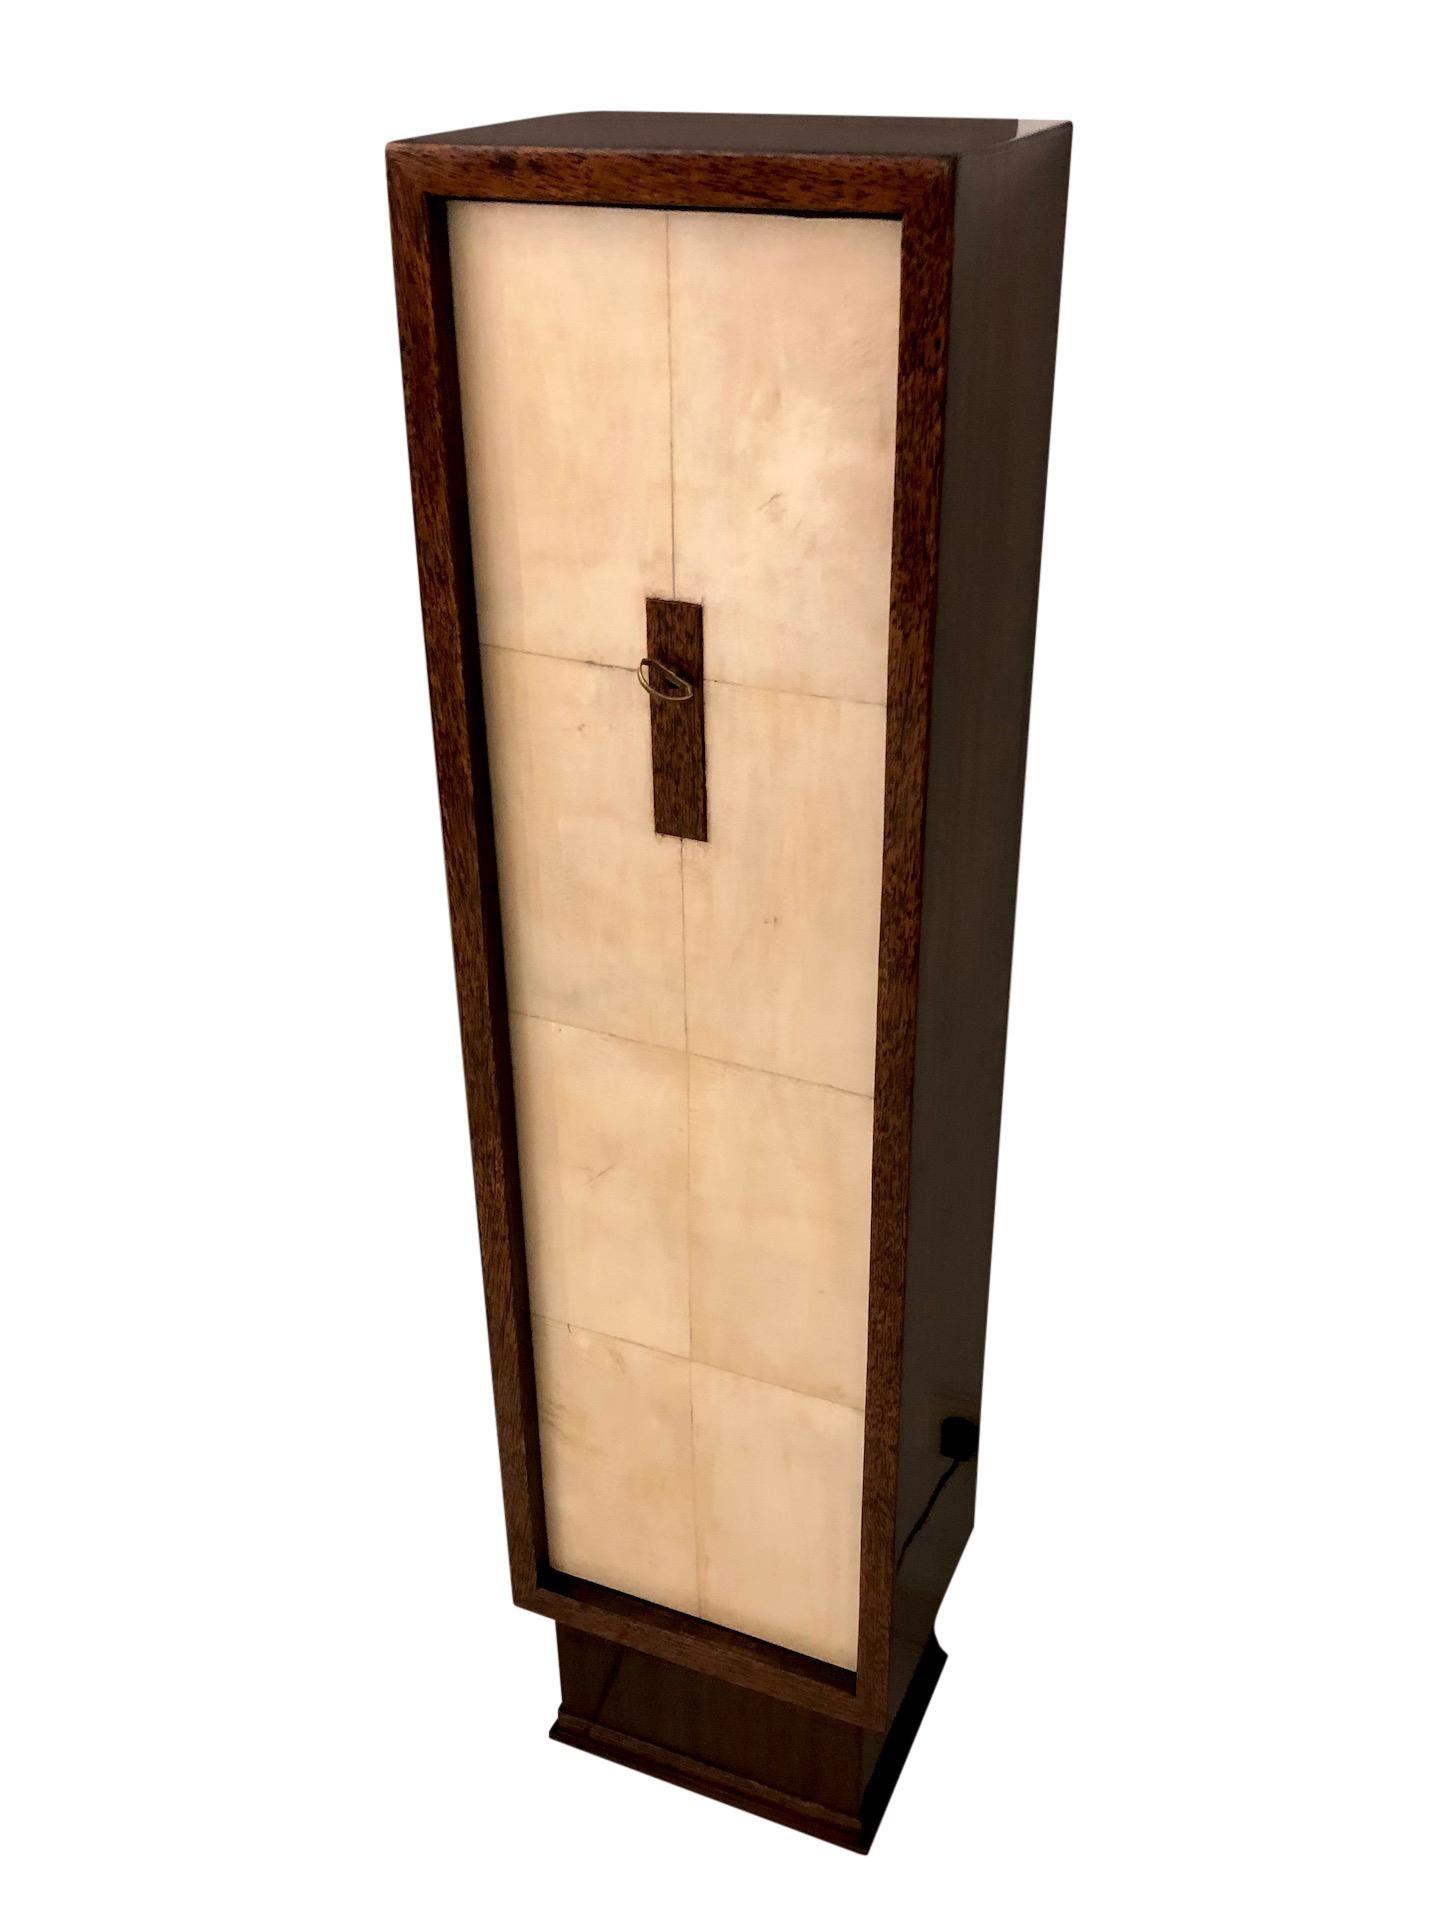 Slim Art Deco cabinet in palm wood 
Front door with parchment surface 
Key lock in the middle of the door 
attributed to Maison Dominique.

High quality restoration 
Shellac hand polish 

Original French Art Deco, 1930s.